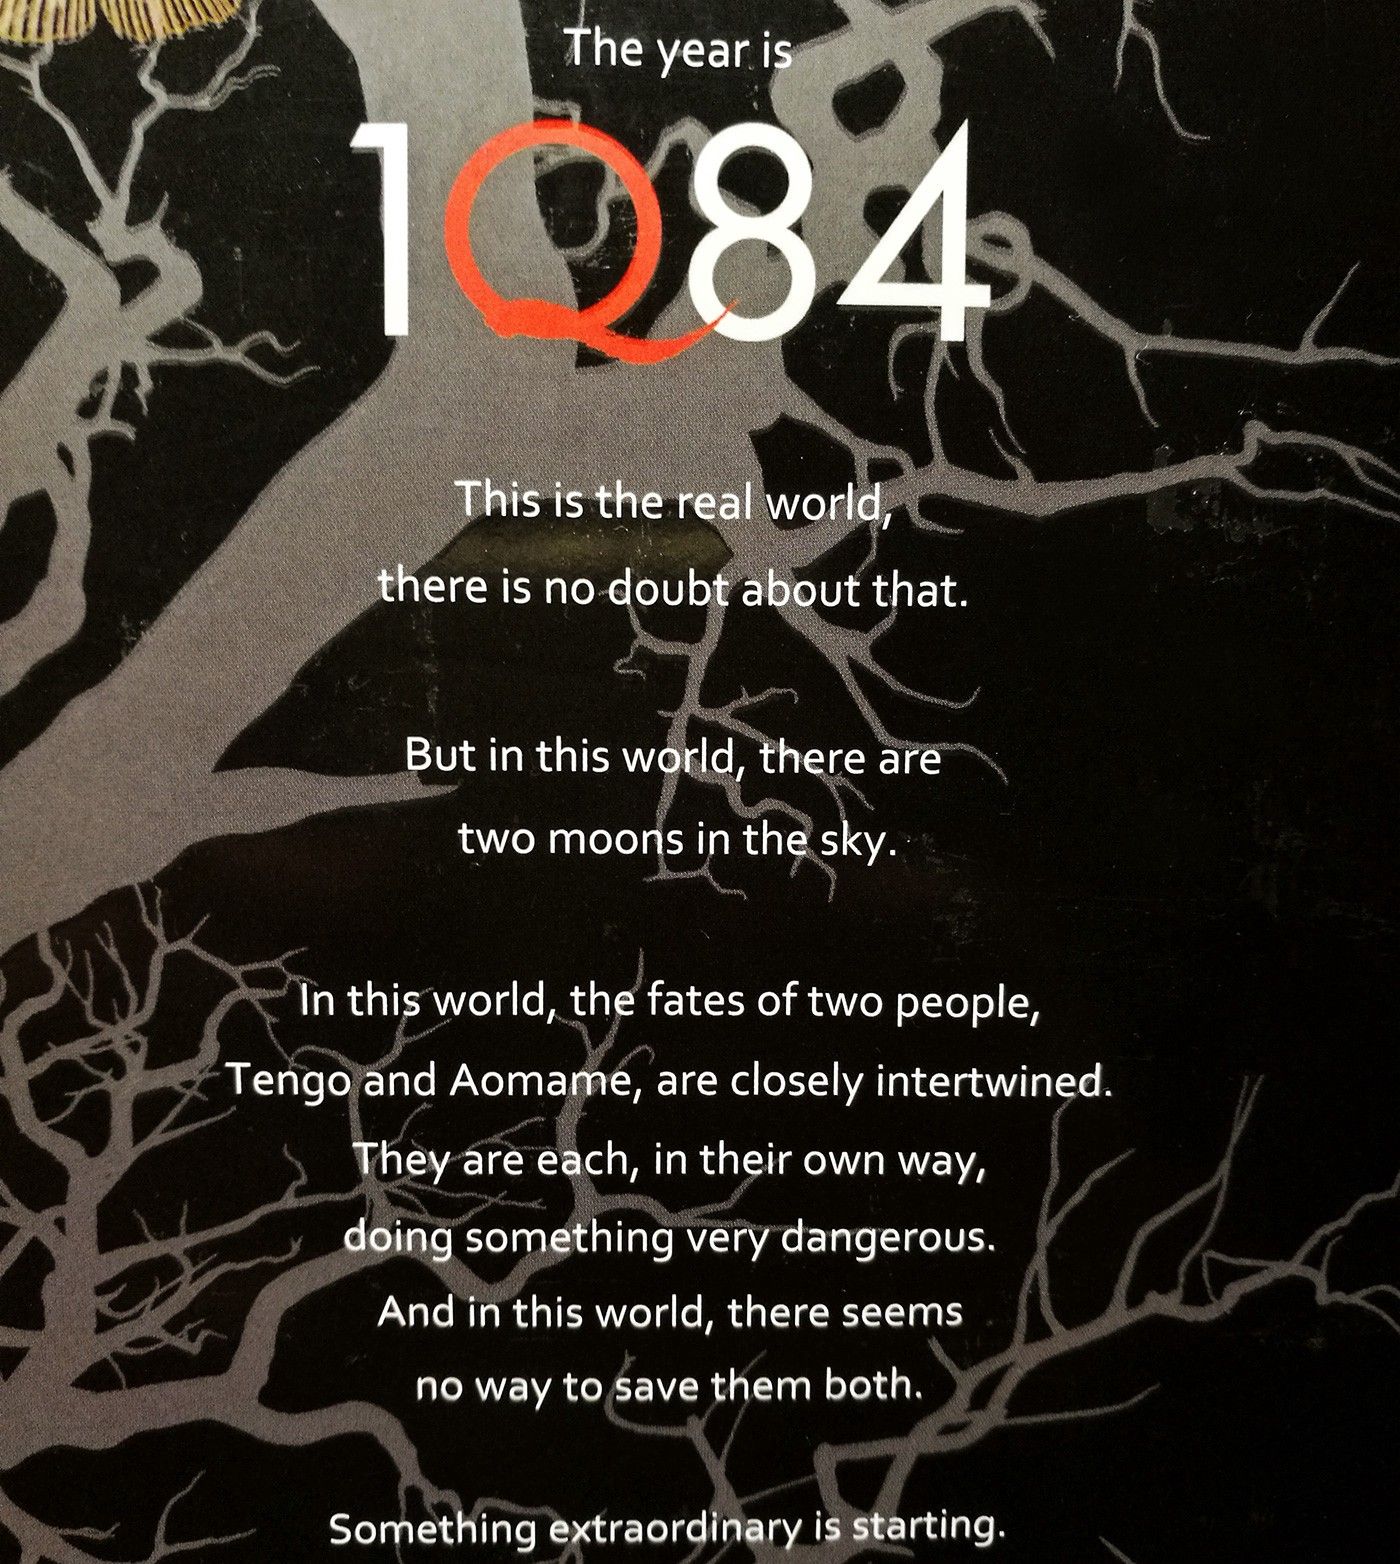 Photograph of the back cover of Haruki Murakami’s 1Q84 trilogy, taken by the author.